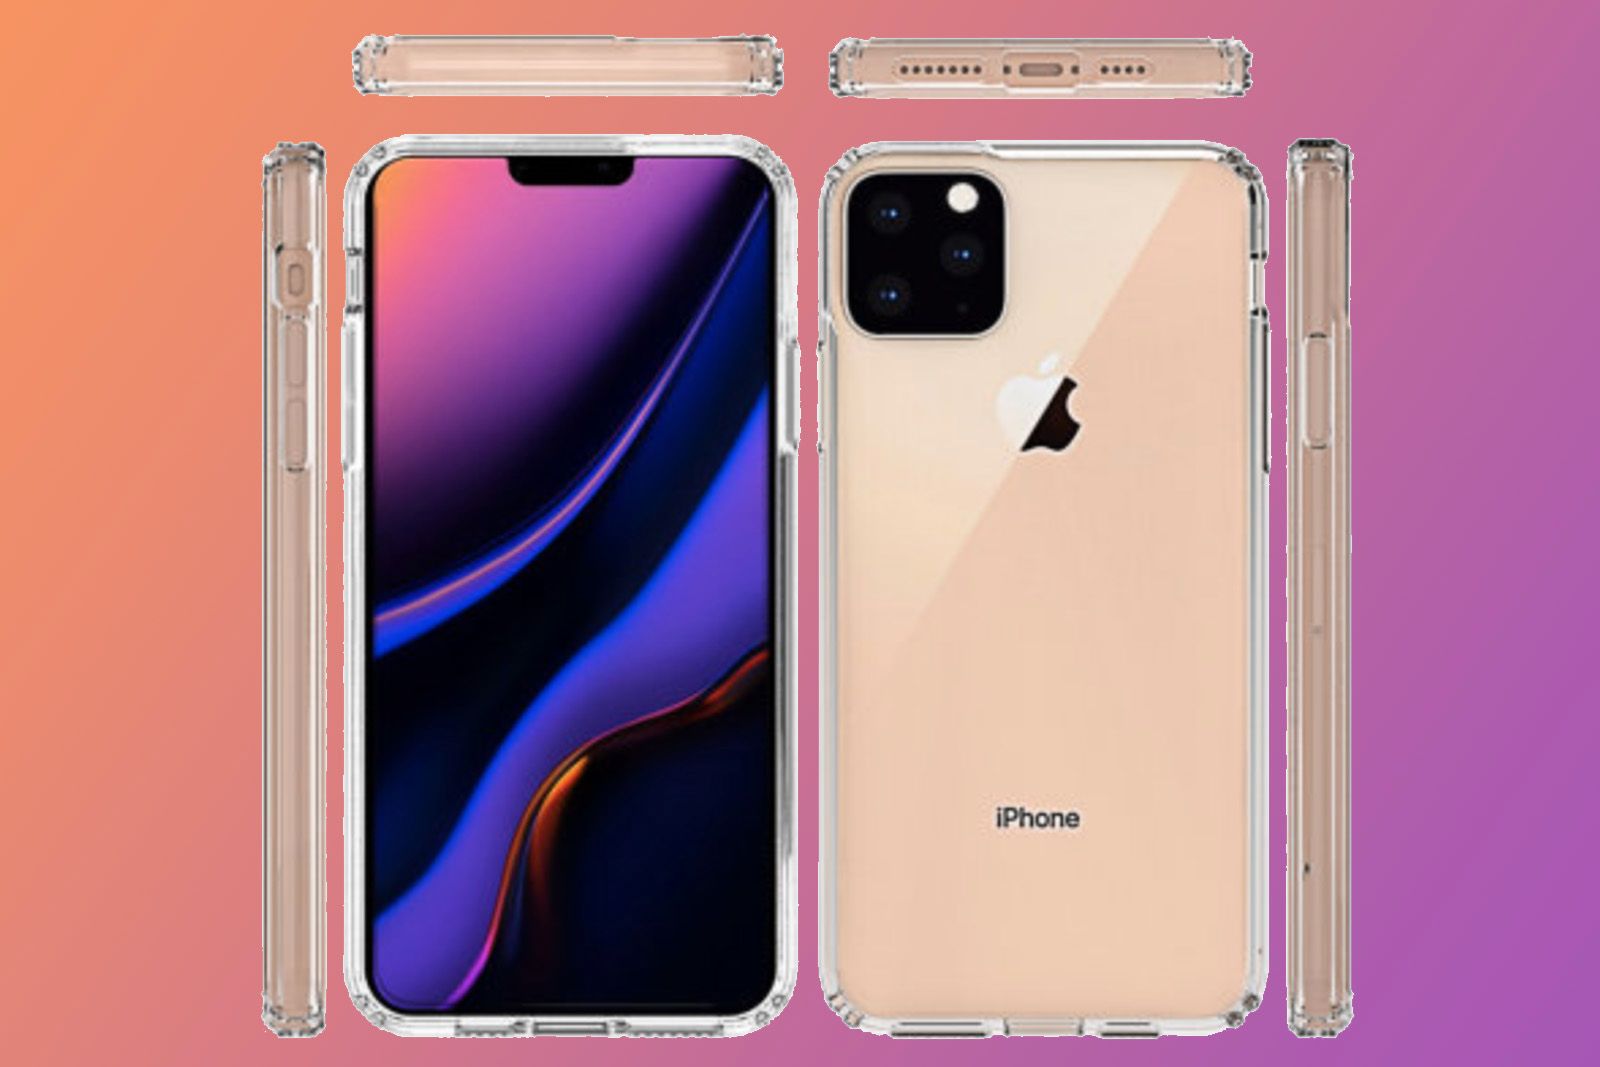 Apple iPhone 11 Max case suggests no USB Type-C and that square rear camera again image 1